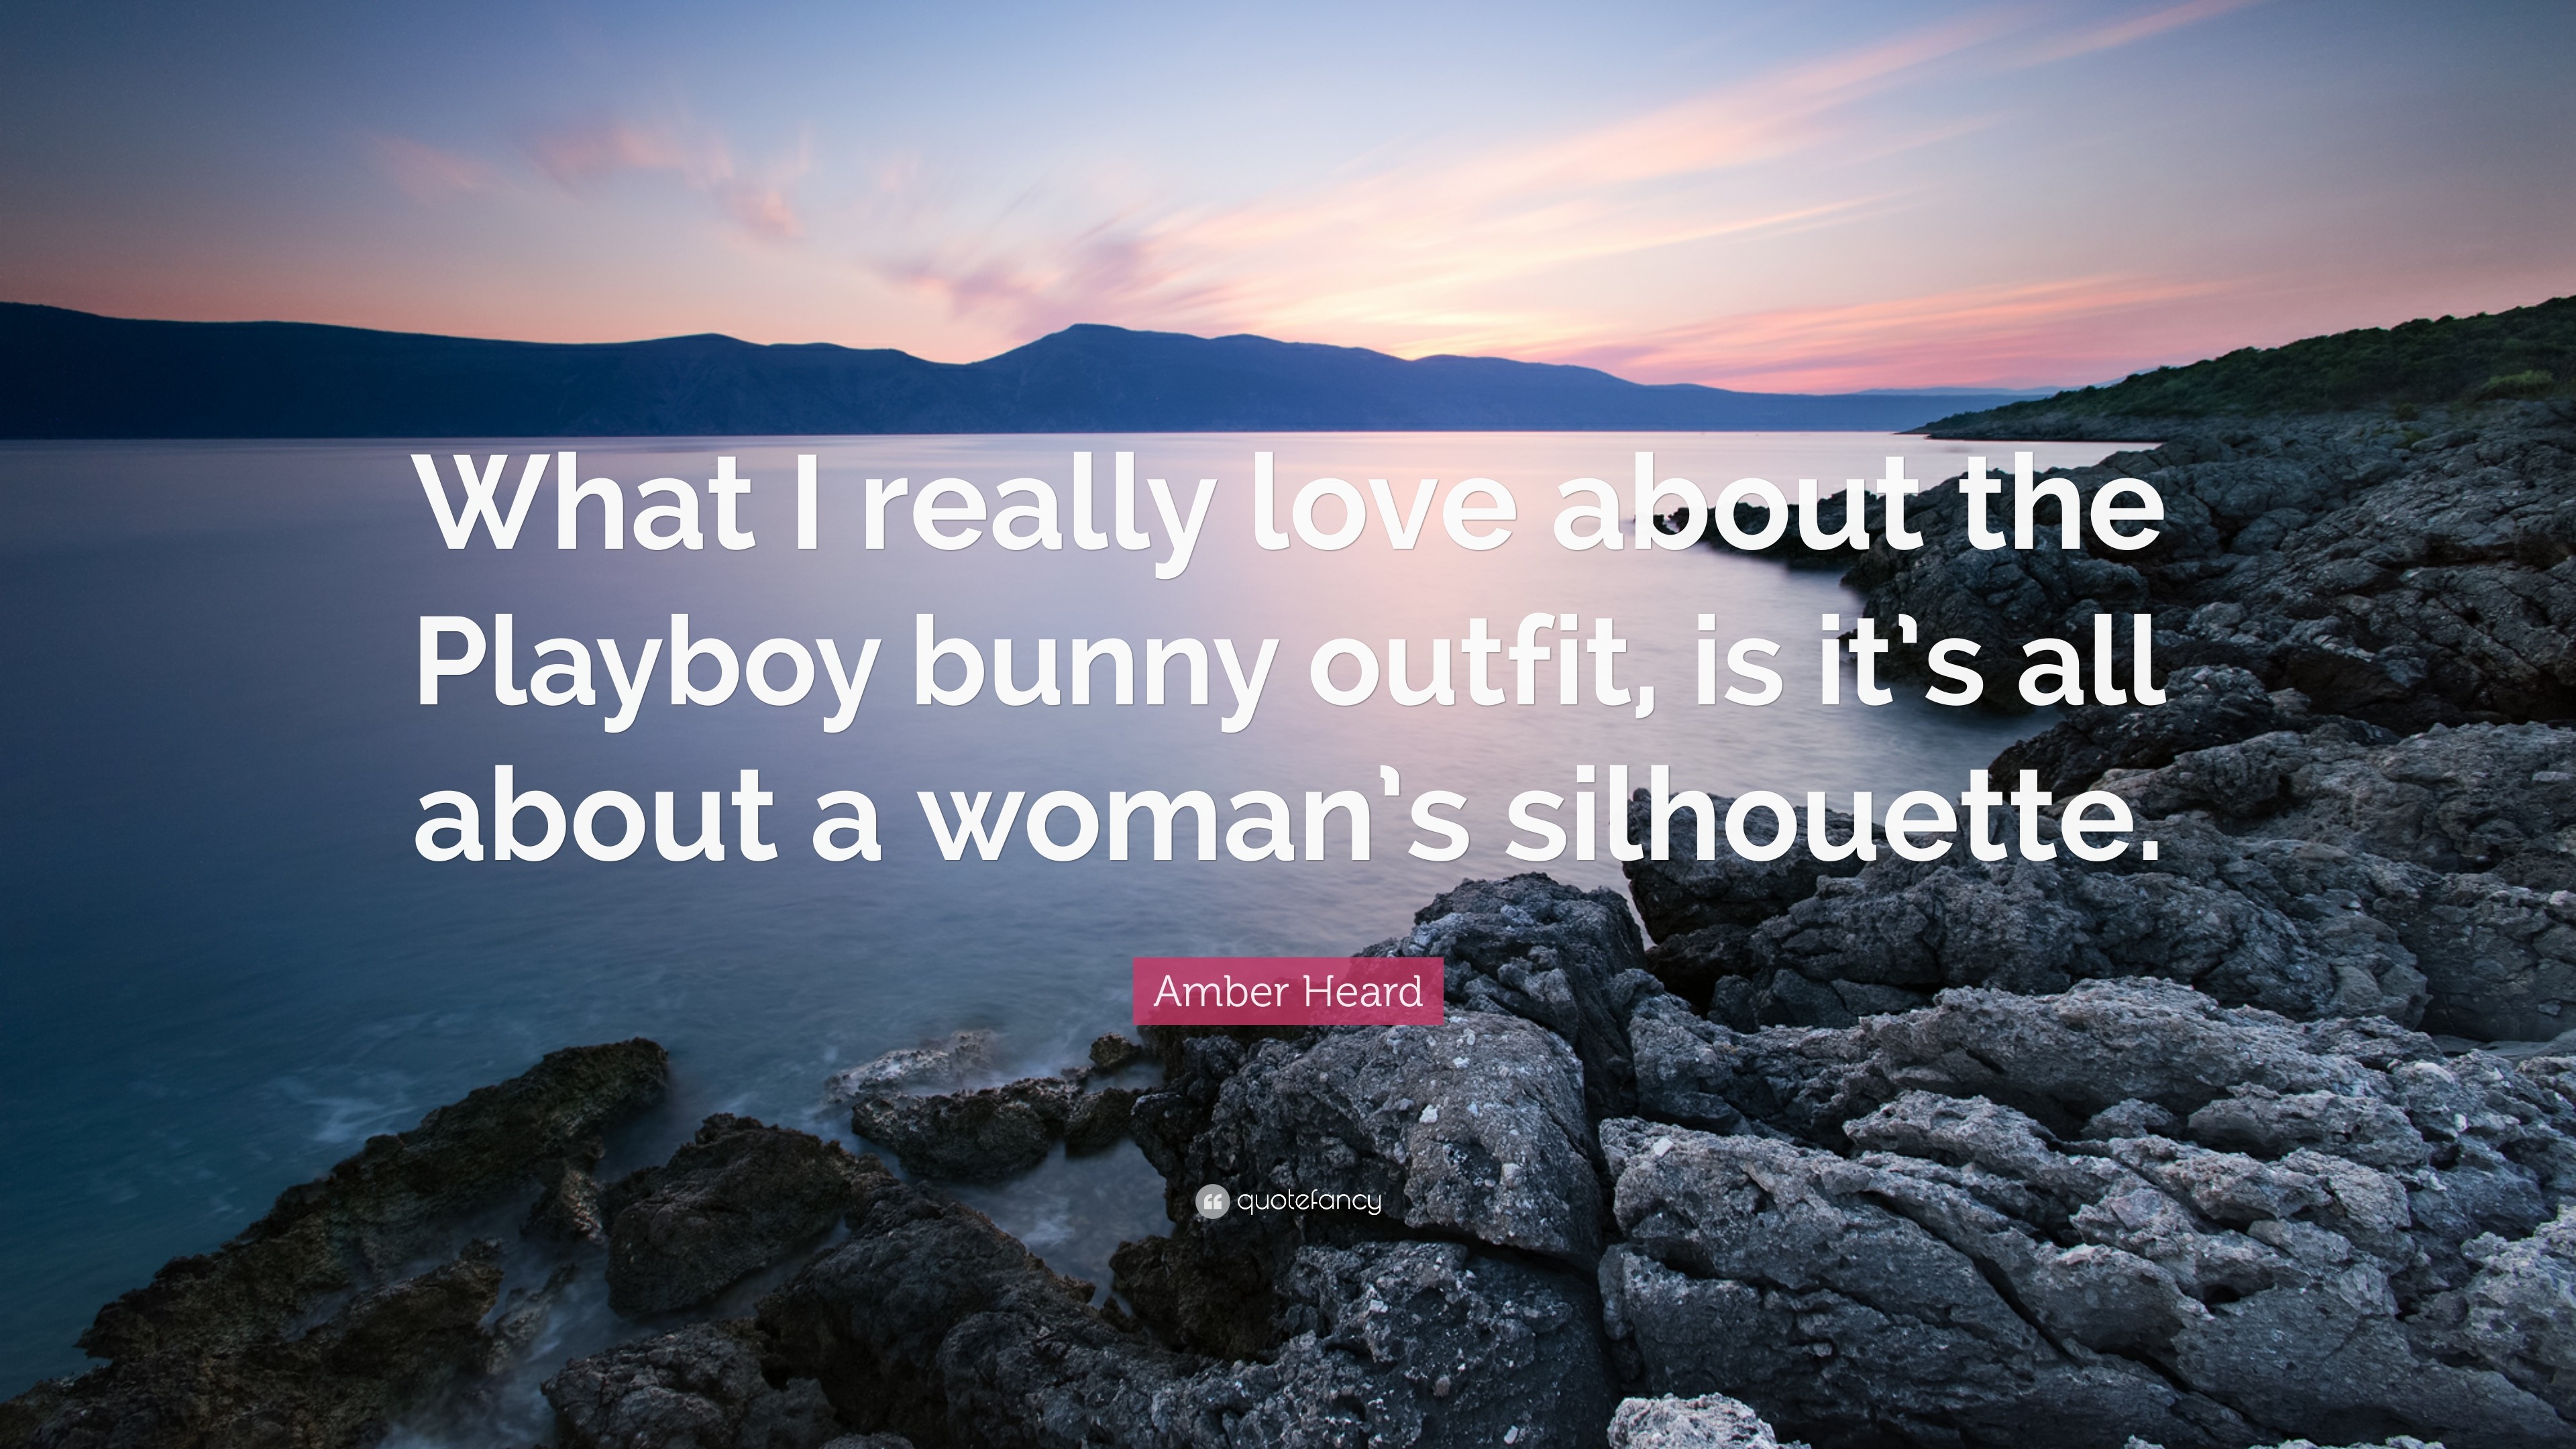 3840x2160 Amber Heard Quote: “What I really love about the Playboy bunny outfit, is